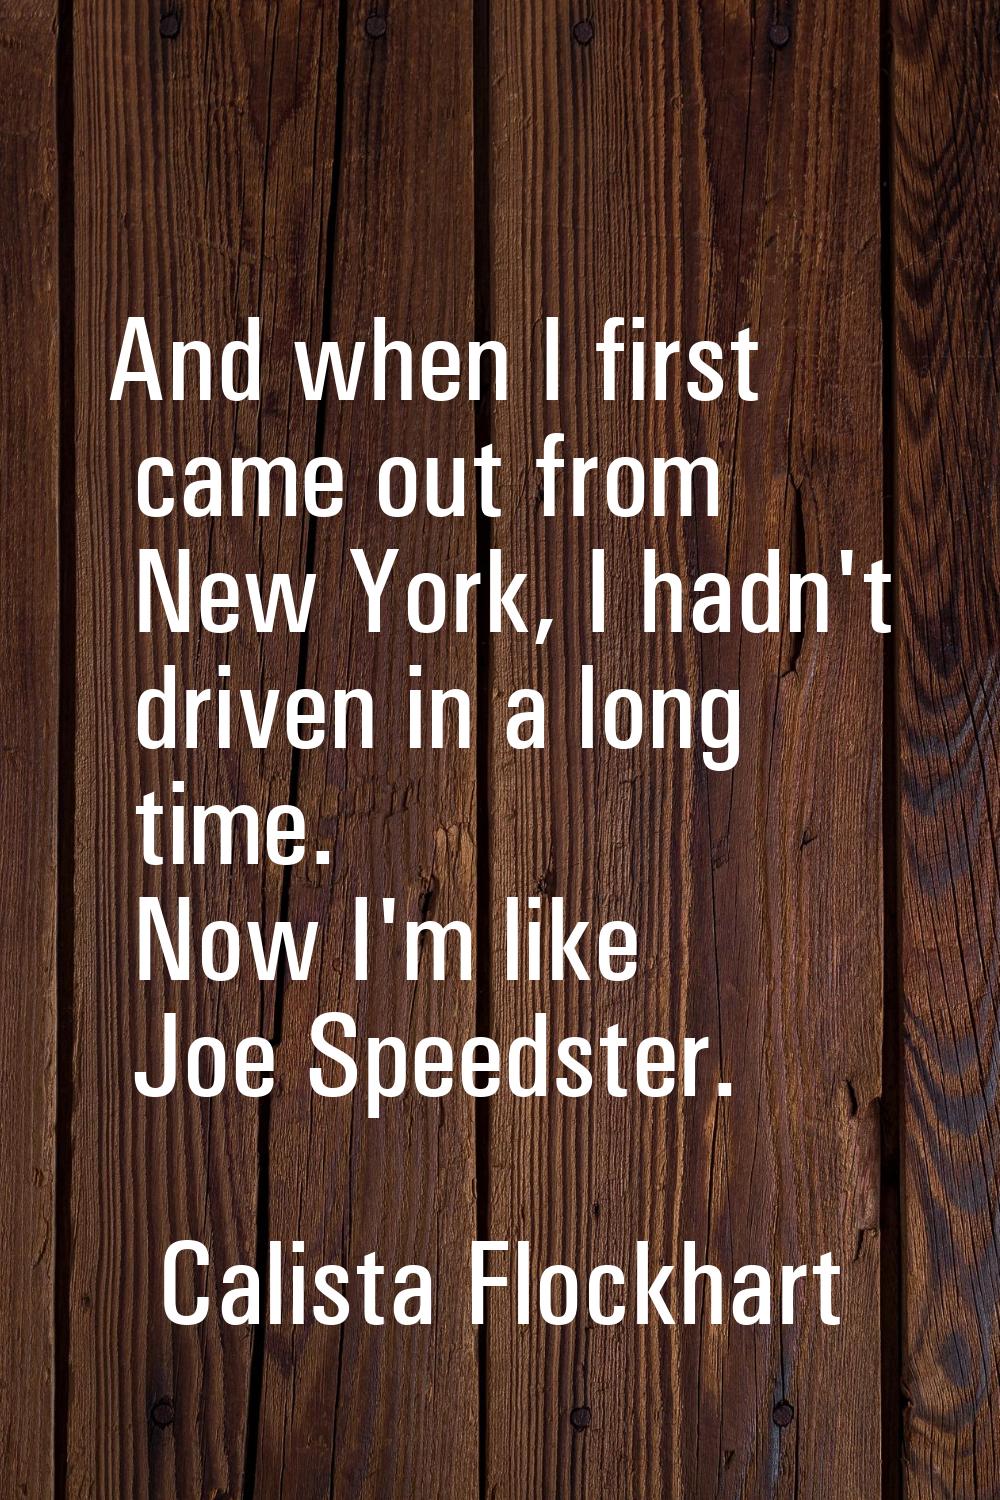 And when I first came out from New York, I hadn't driven in a long time. Now I'm like Joe Speedster